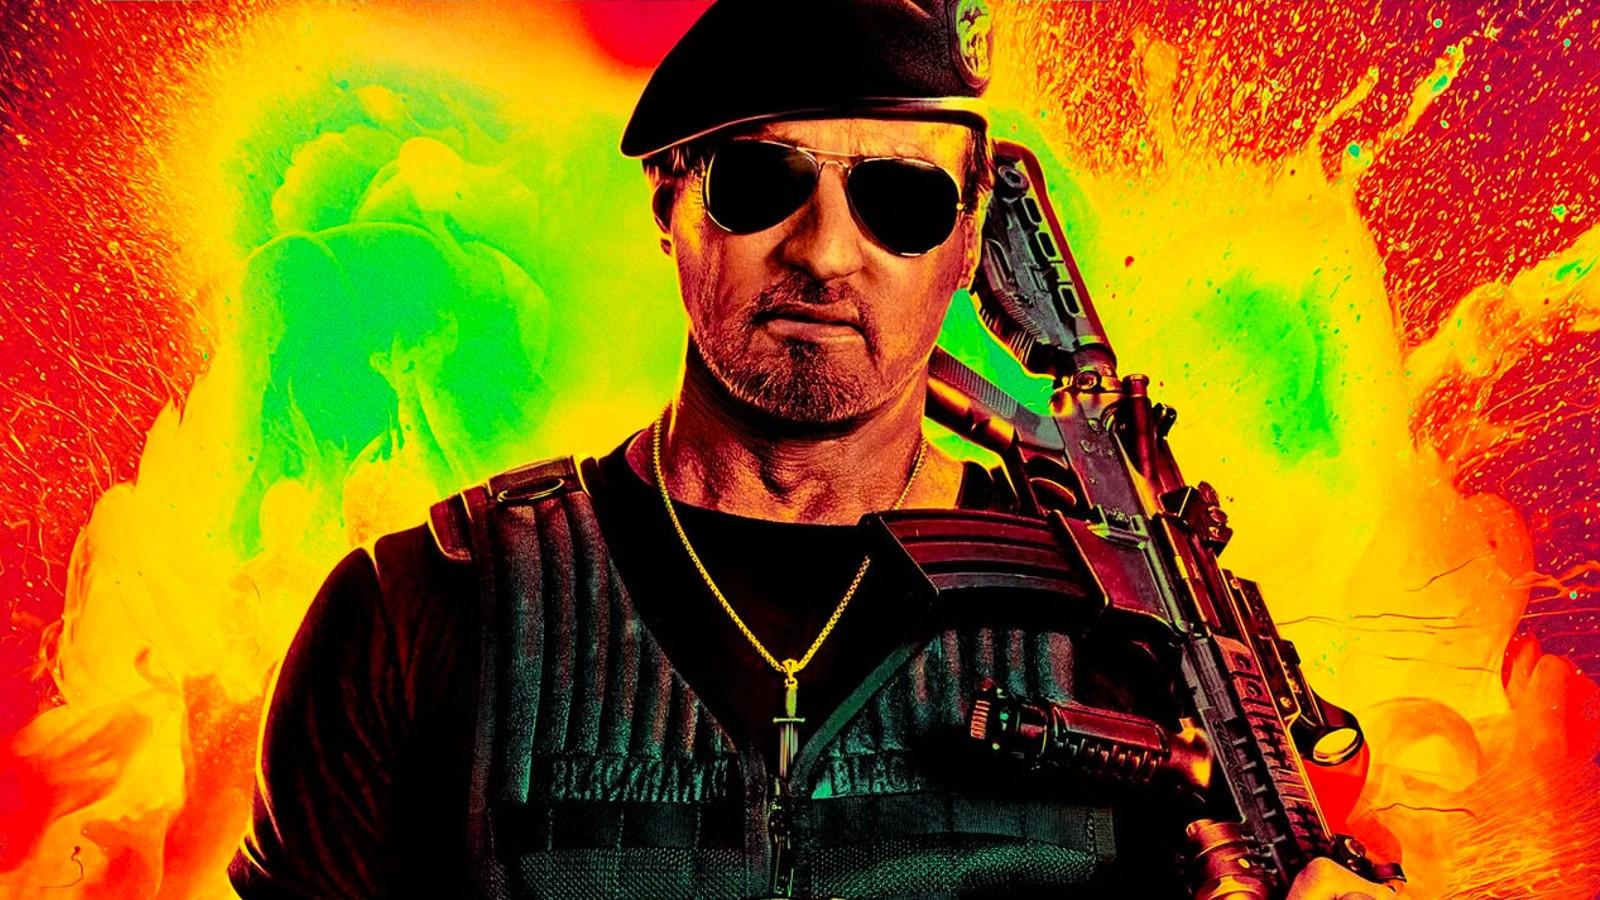 Sylvester Stallone on the poster for The Expendables 4